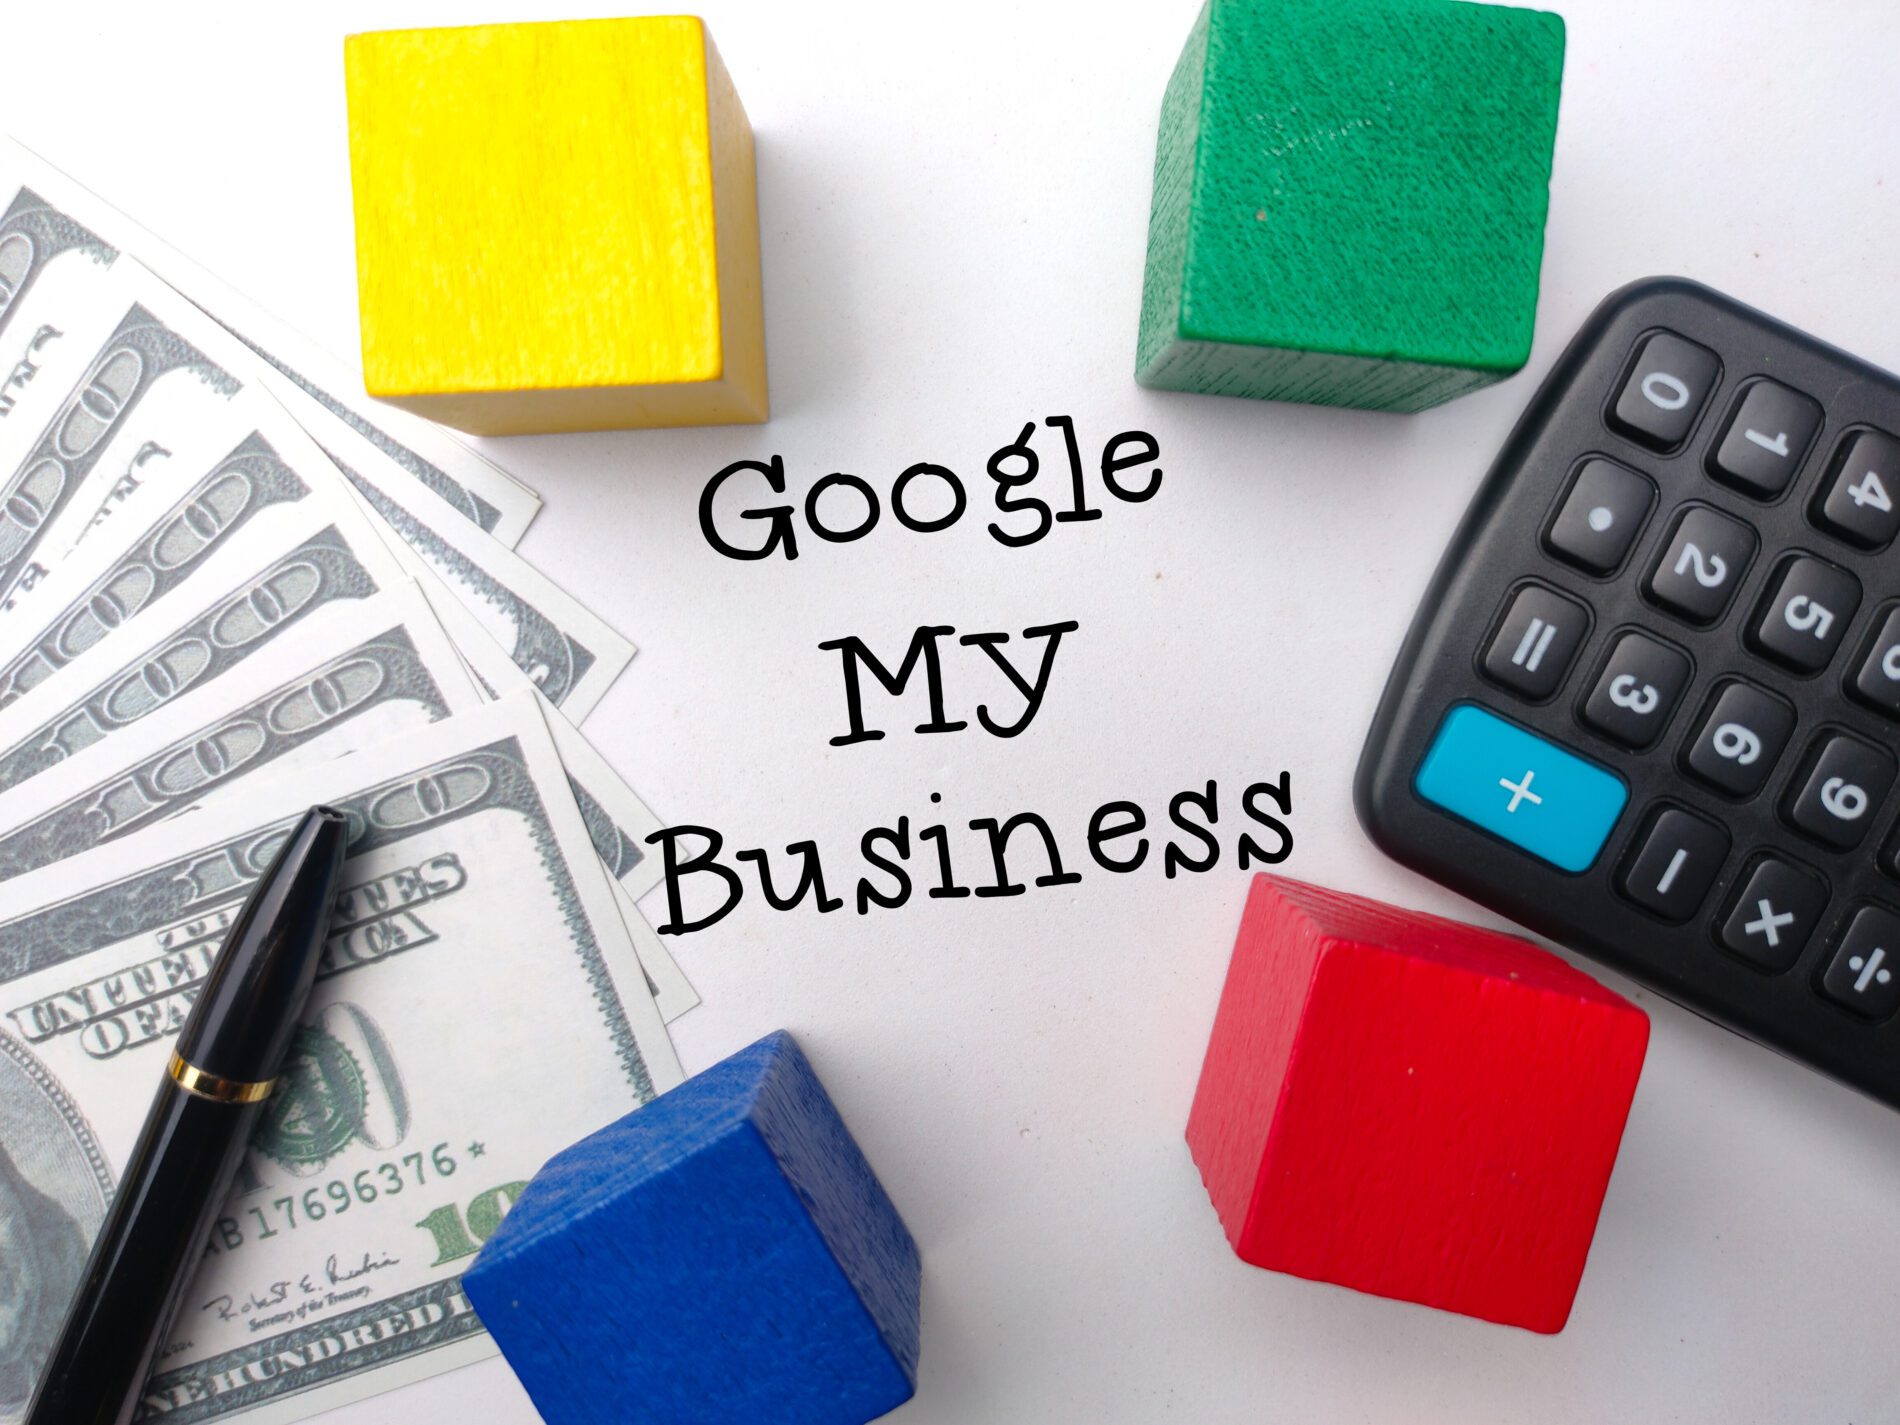 How To Optimize Your Google My Business Listing?